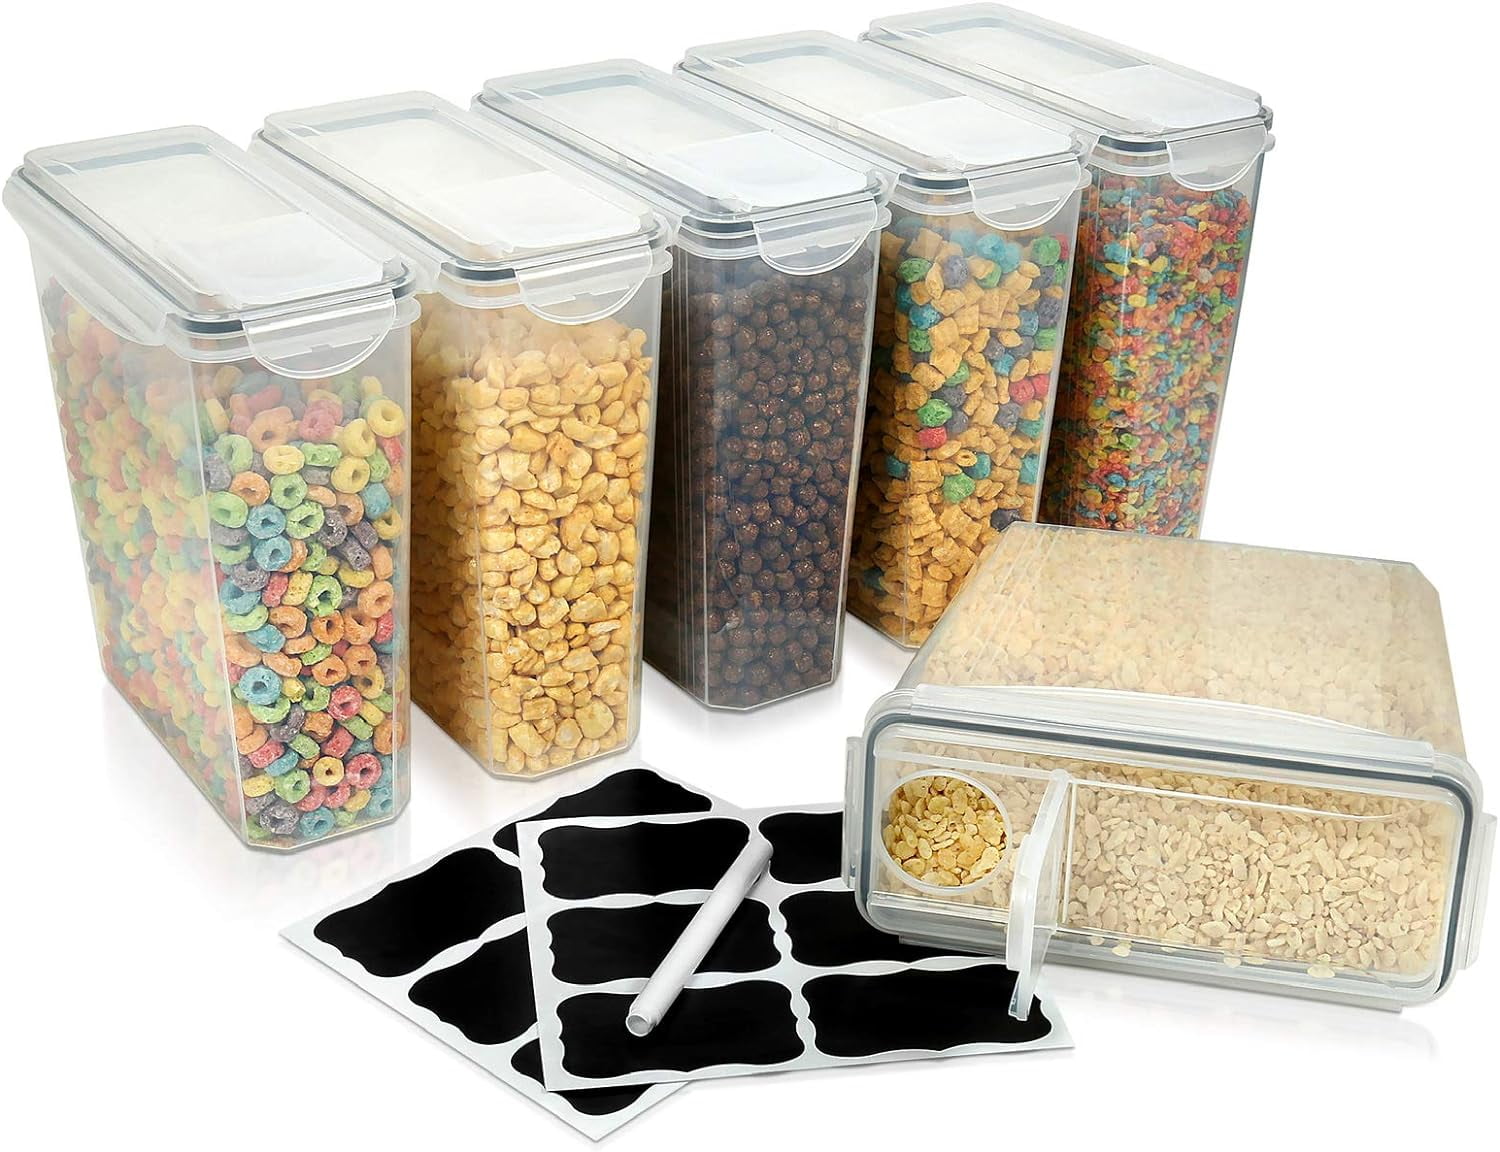 ns.productsocialmetatags:resources.openGraphTitle  Food storage containers,  Food storage, Storage containers